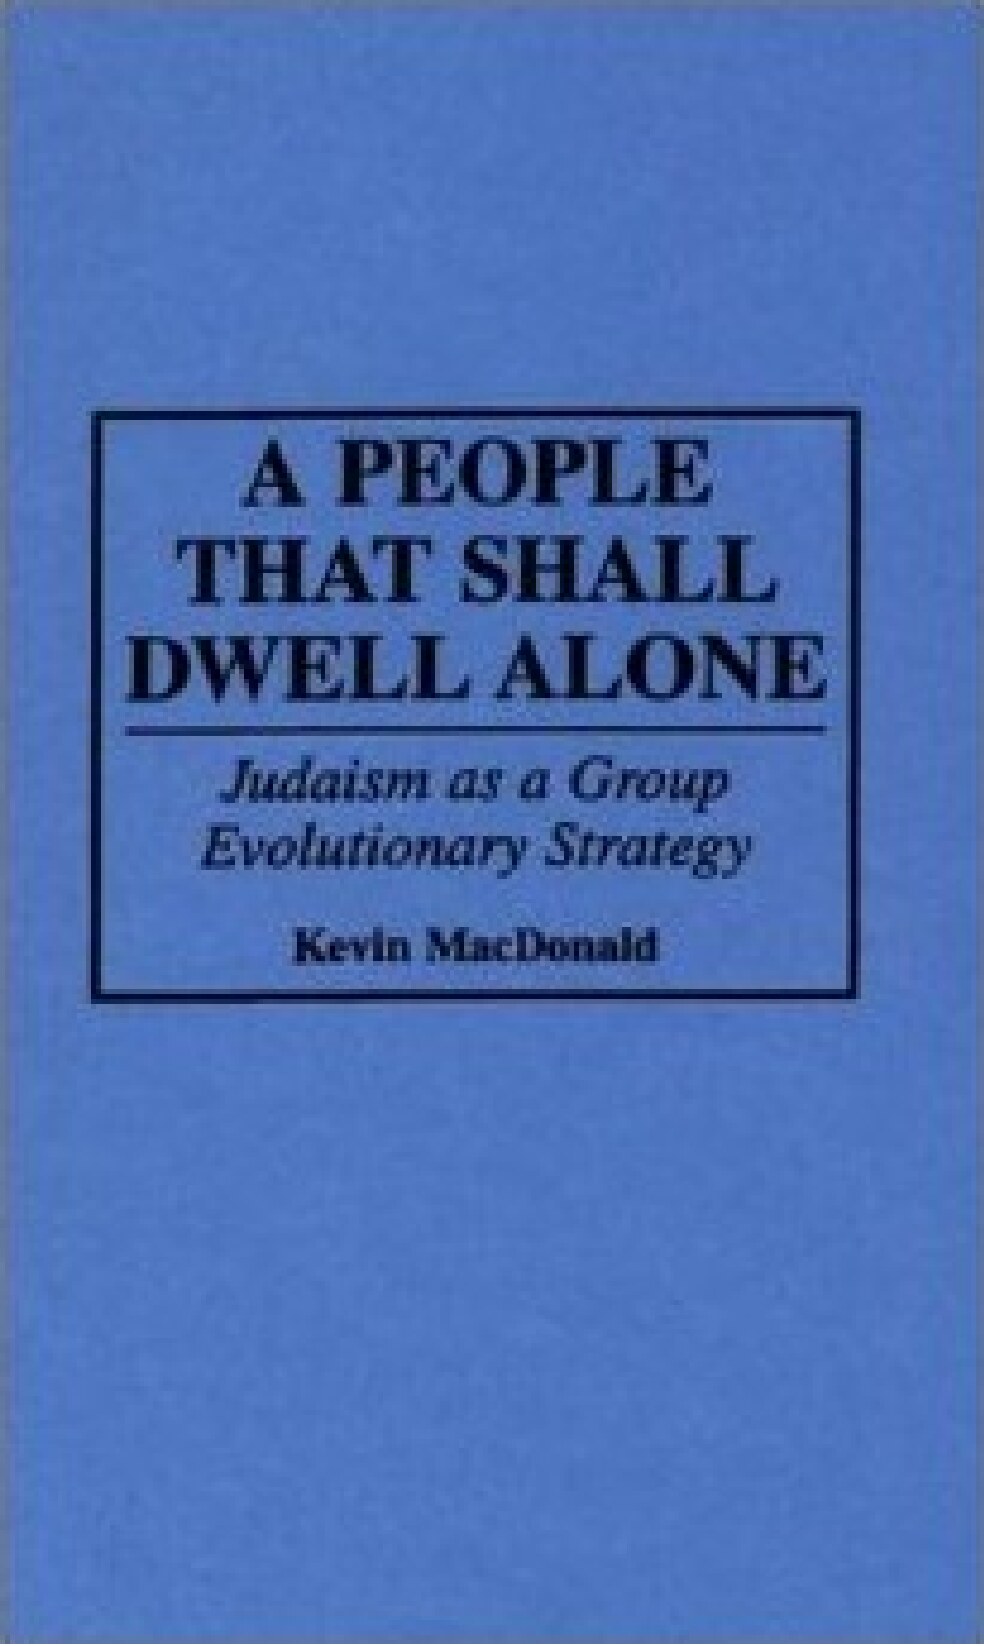 A People That Shall Dwell Alone: Judaism as a Group Evolutionary Strategy